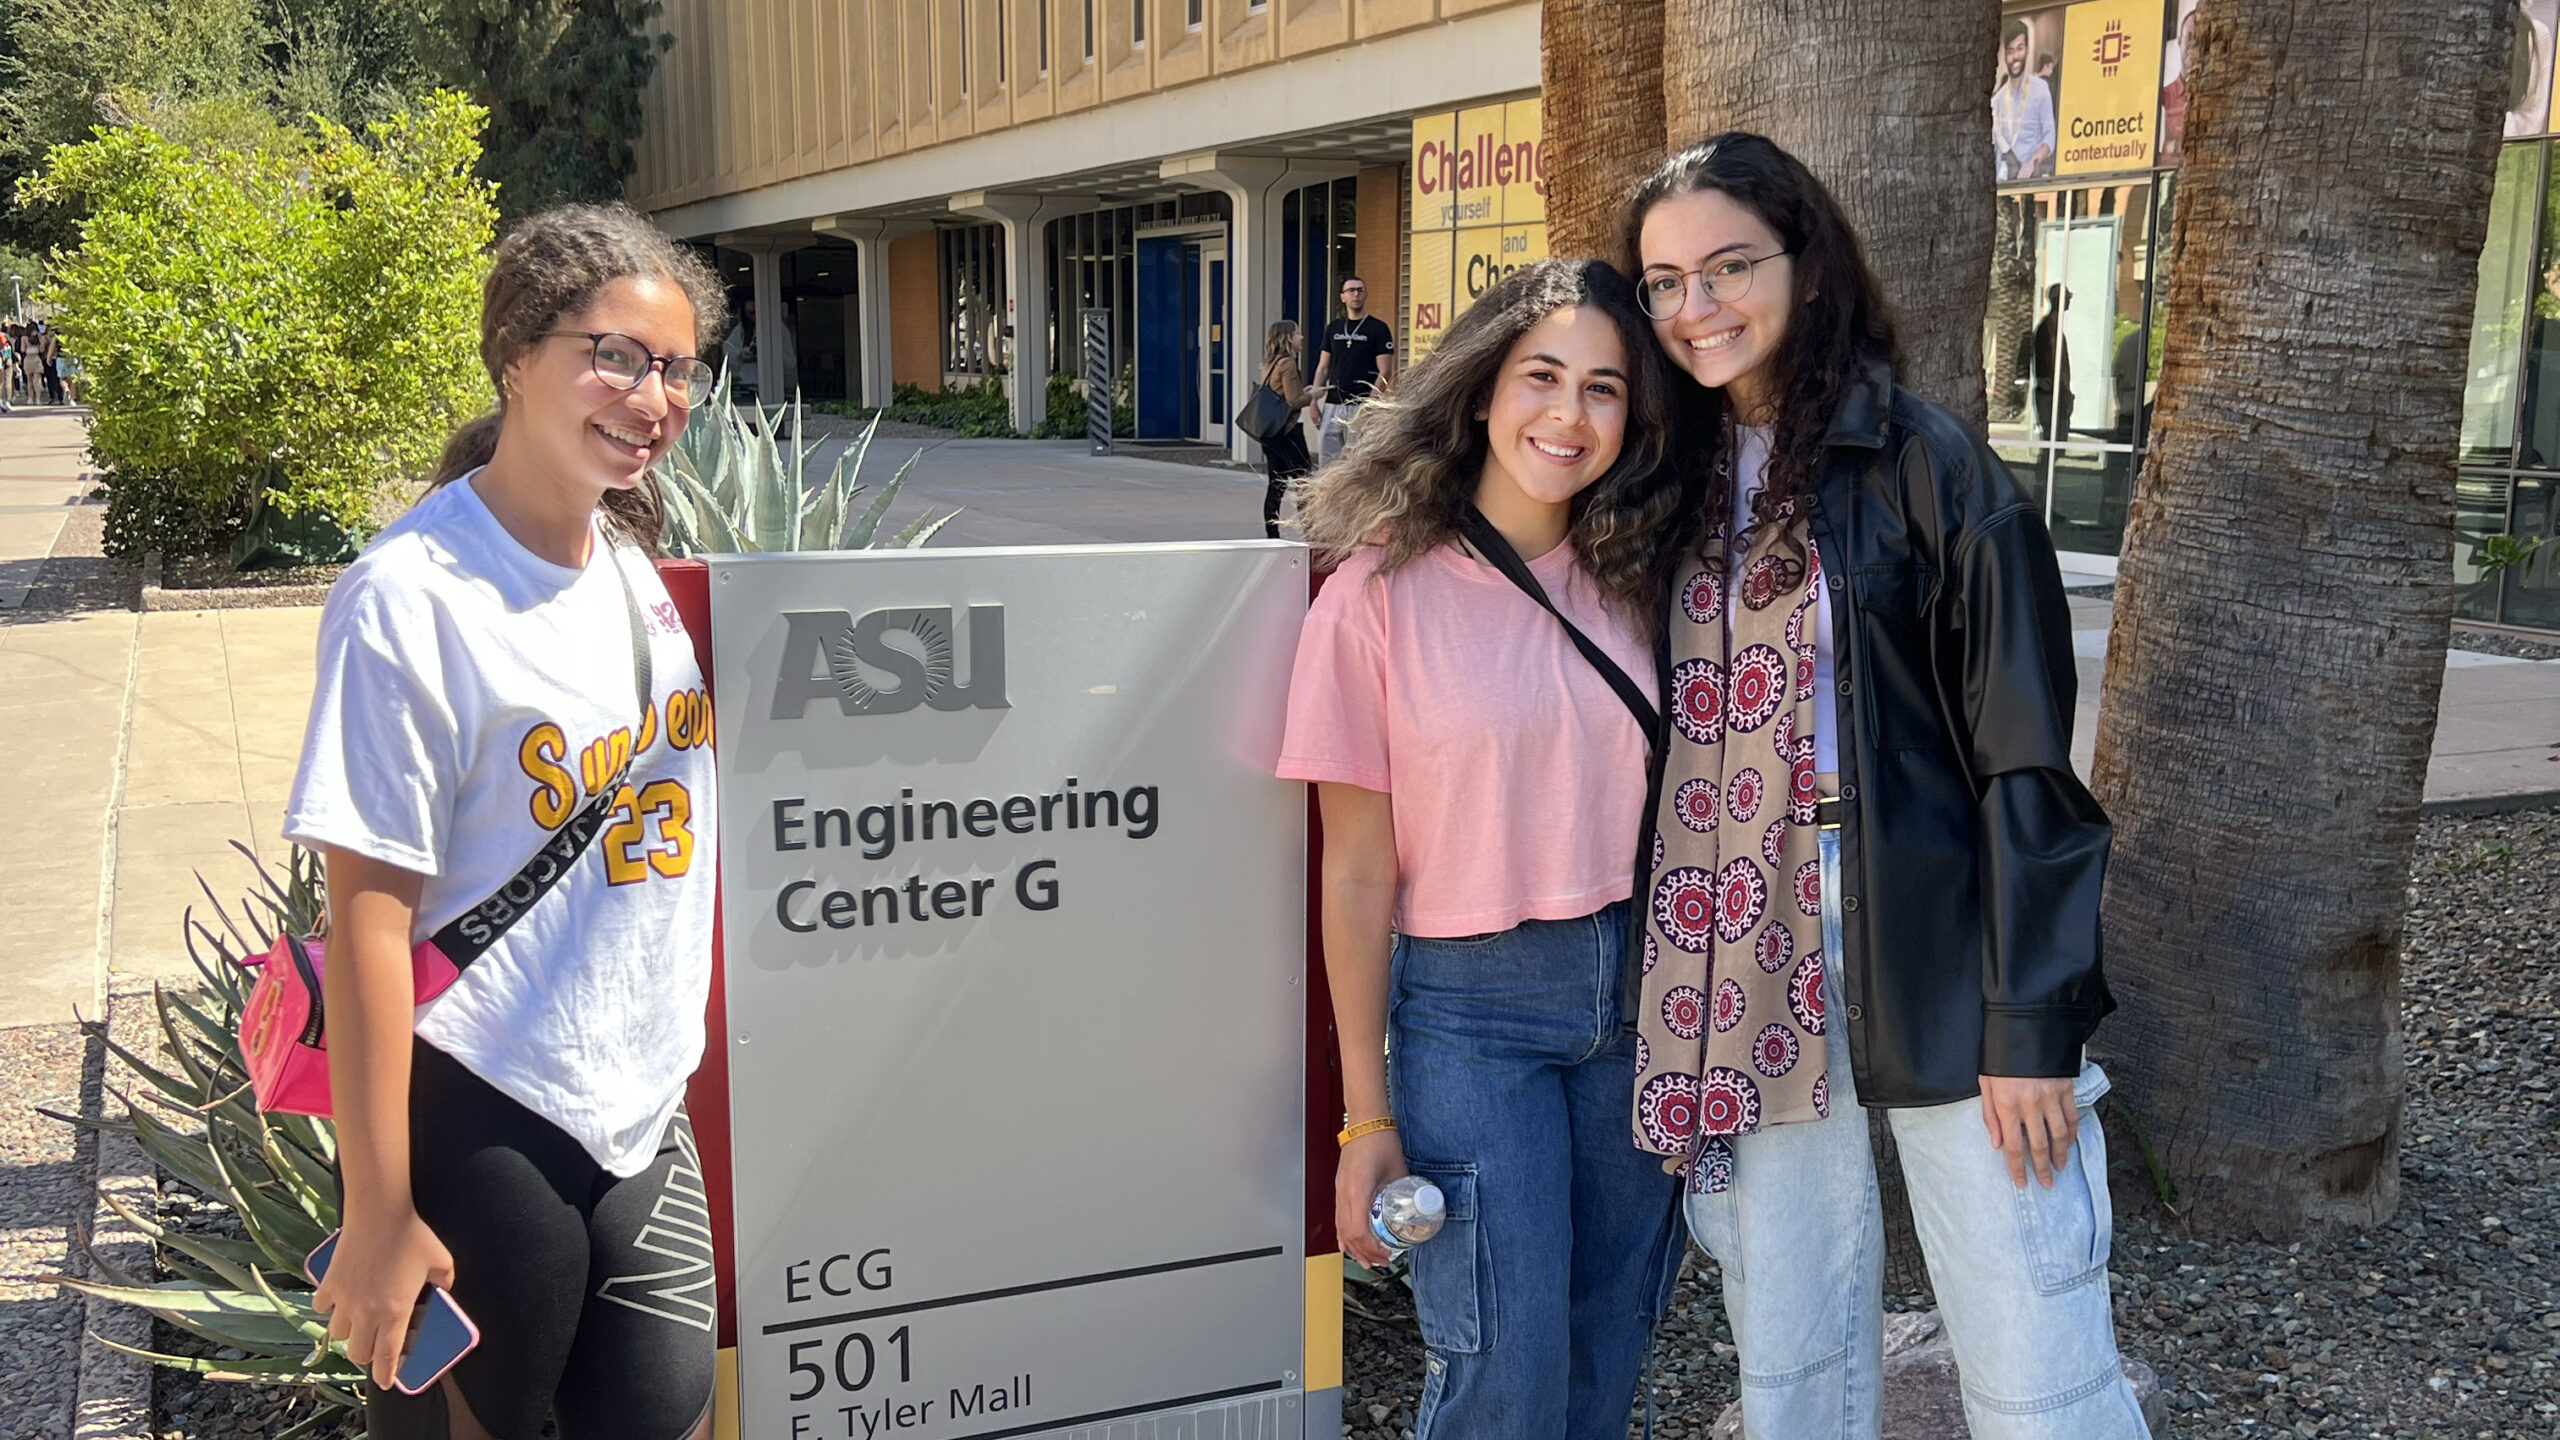 Three young women pose in front of engineering sign